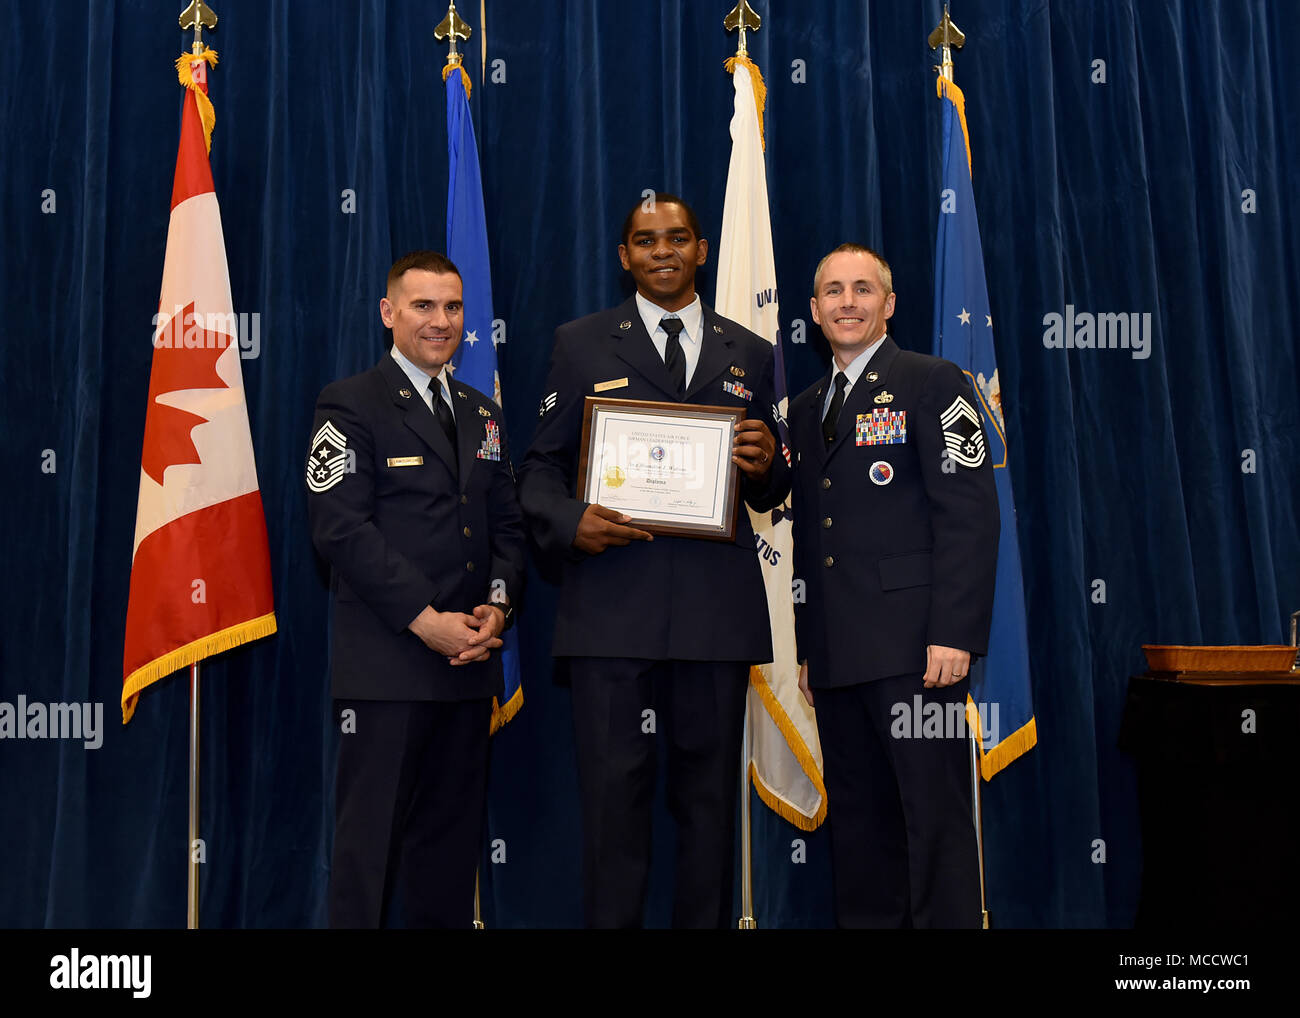 Senior Airman Brandon Watson from Fort Indian Town Gap Air National Guard Base, Penn., takes the Distinguished Graduate Award in Airman Leadership School 18-4 at the Chief Master Sgt. Paul H. Lankford Enlisted Professional Military Education Center on McGhee Tyson Air National Guard Base in East Tennessee, Feb. 8, 2018, during the graduation ceremony. (U.S. Air National Guard photo/Master Sgt. Mike R. Smith) Stock Photo